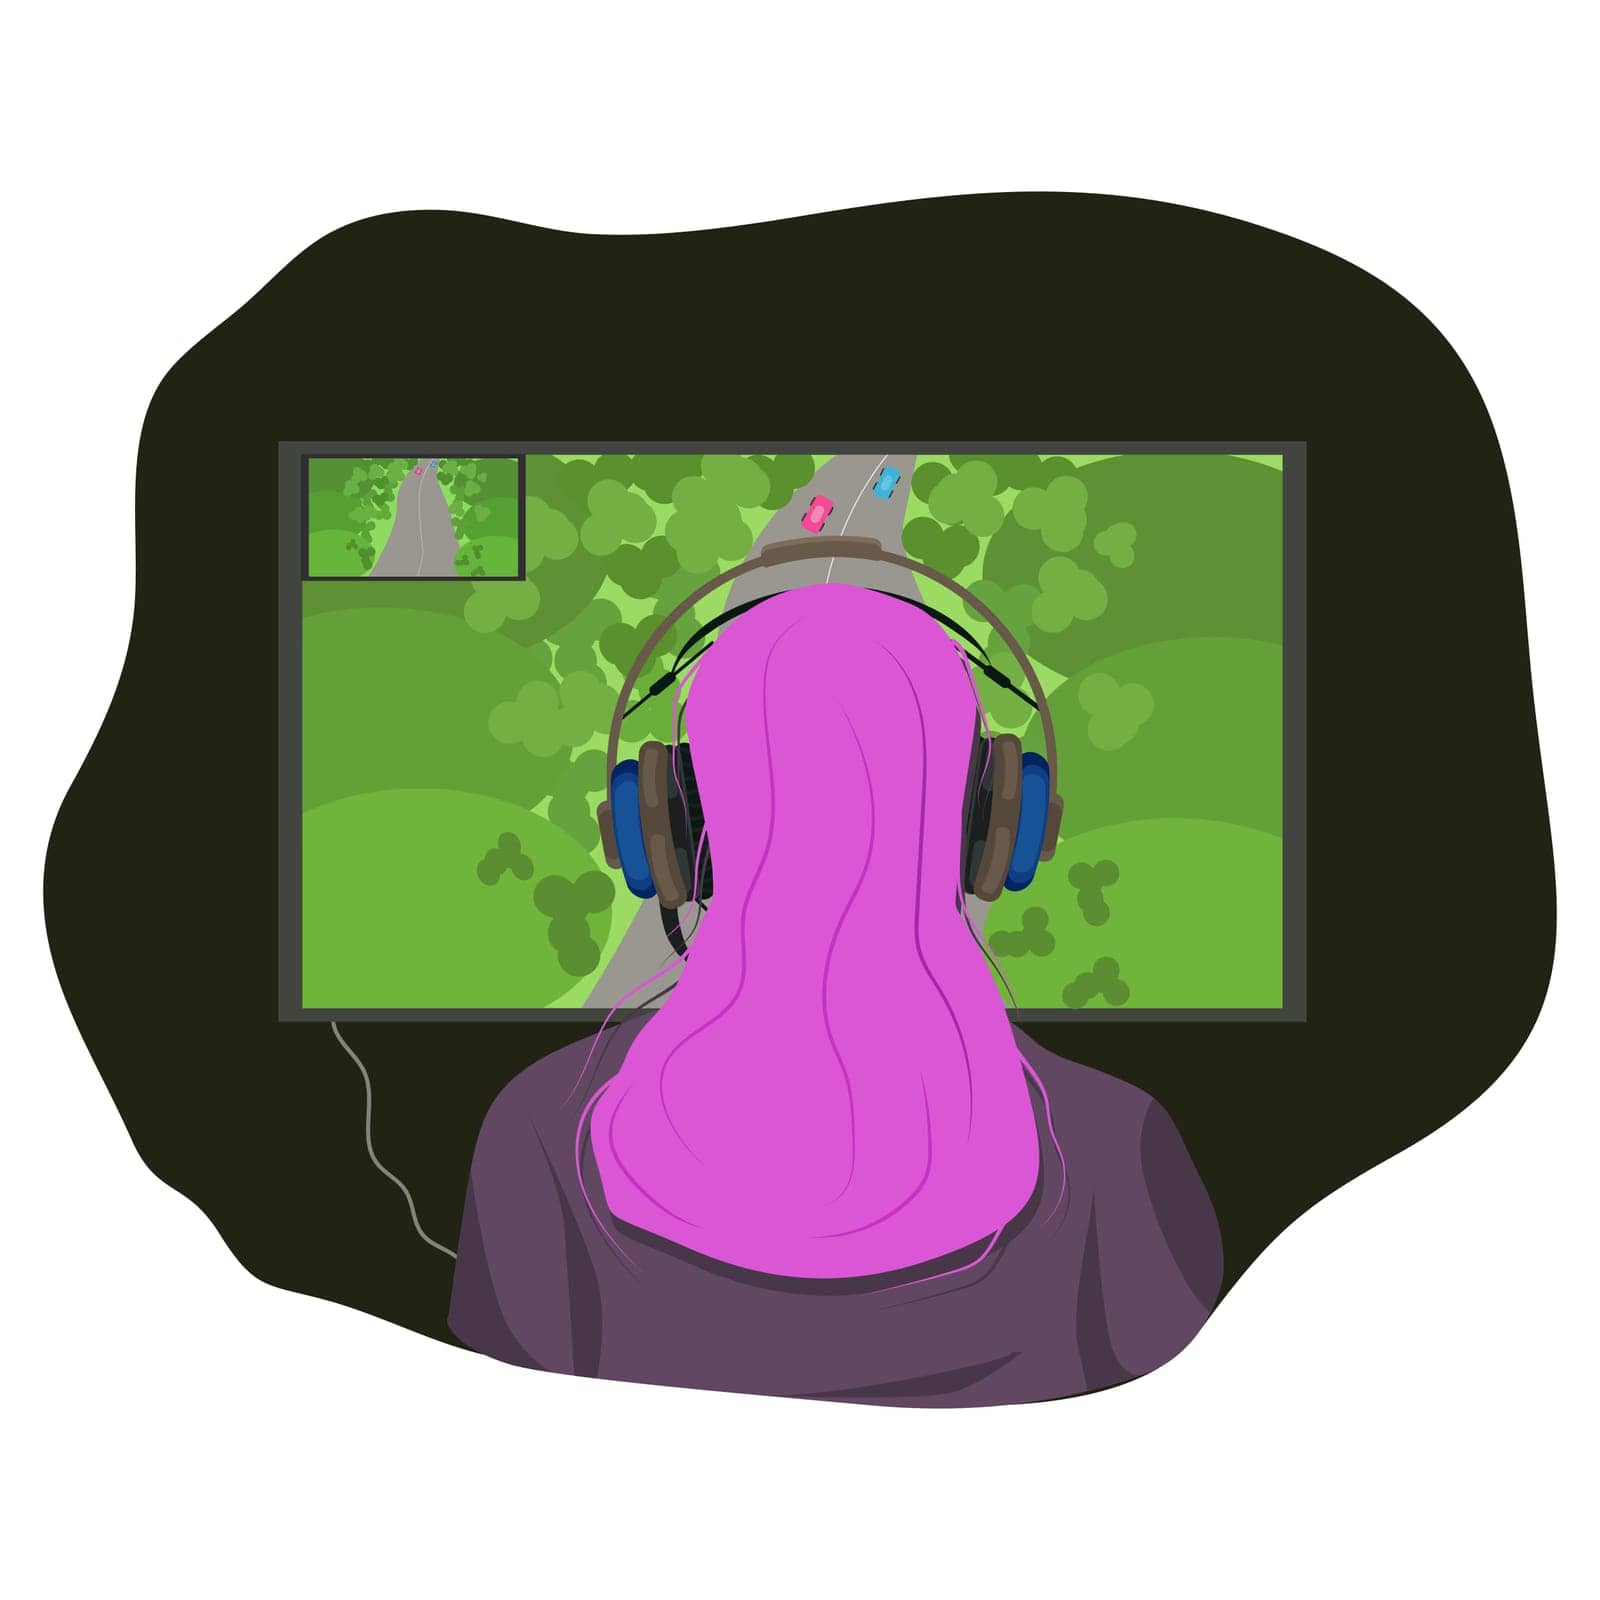 A video game streamer girl with bright fashionable hair plays and records a video